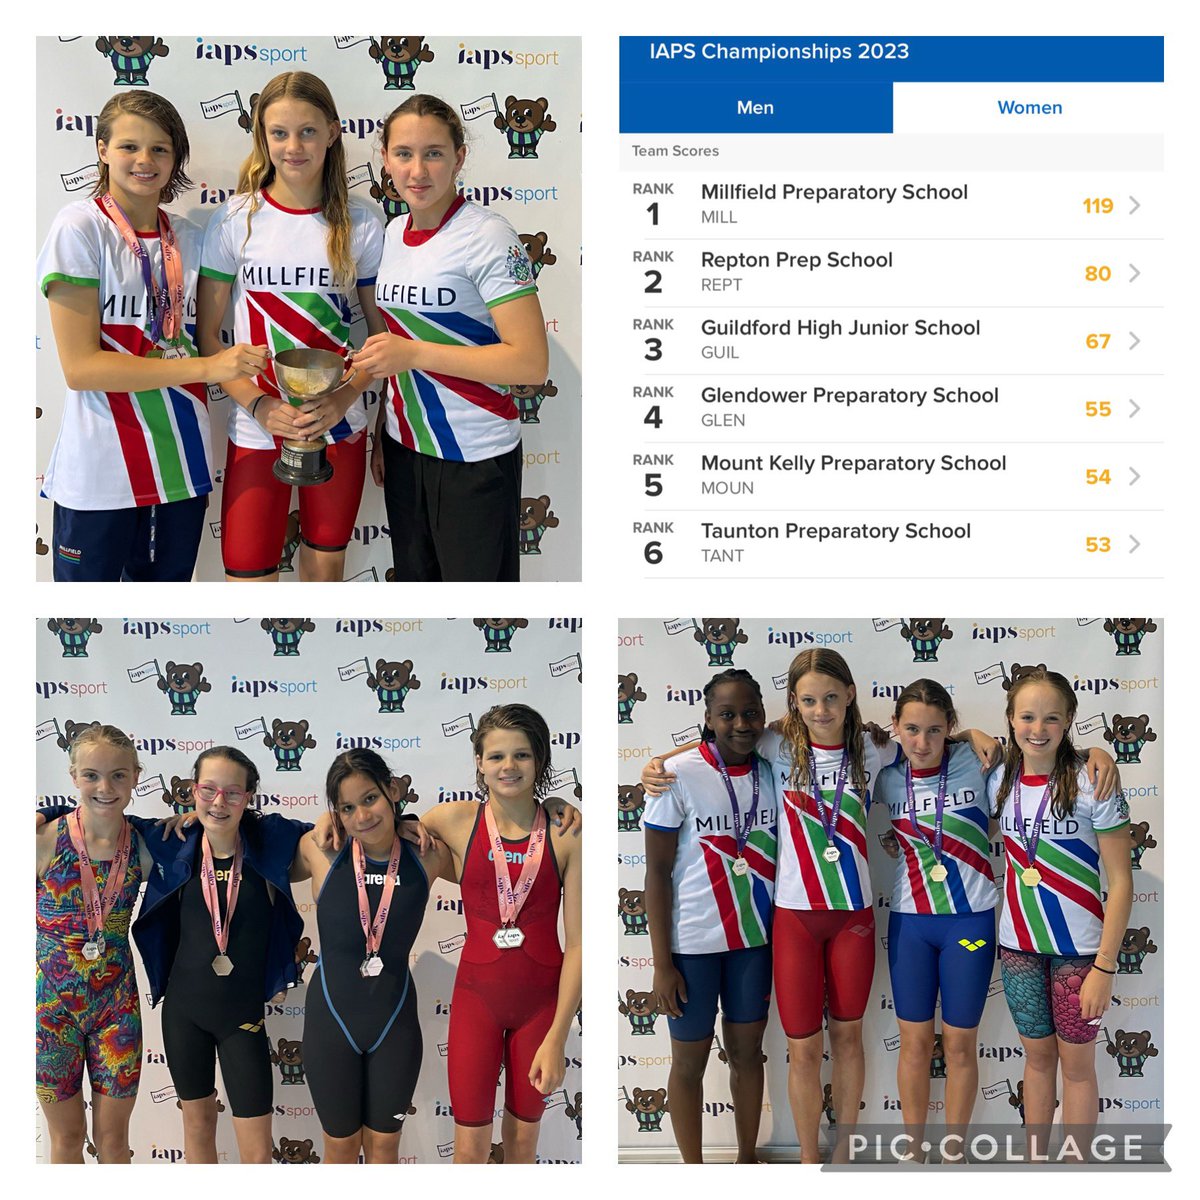 🌟Congratulations to the girls who have been crowned the IAPS National Swimming Champions for the 35th consecutive year 🥇🏆🌟 #soproud well done to everyone who raced this morning - what a fantastic experience 🤩 @iapsuksport @MillfieldSwim